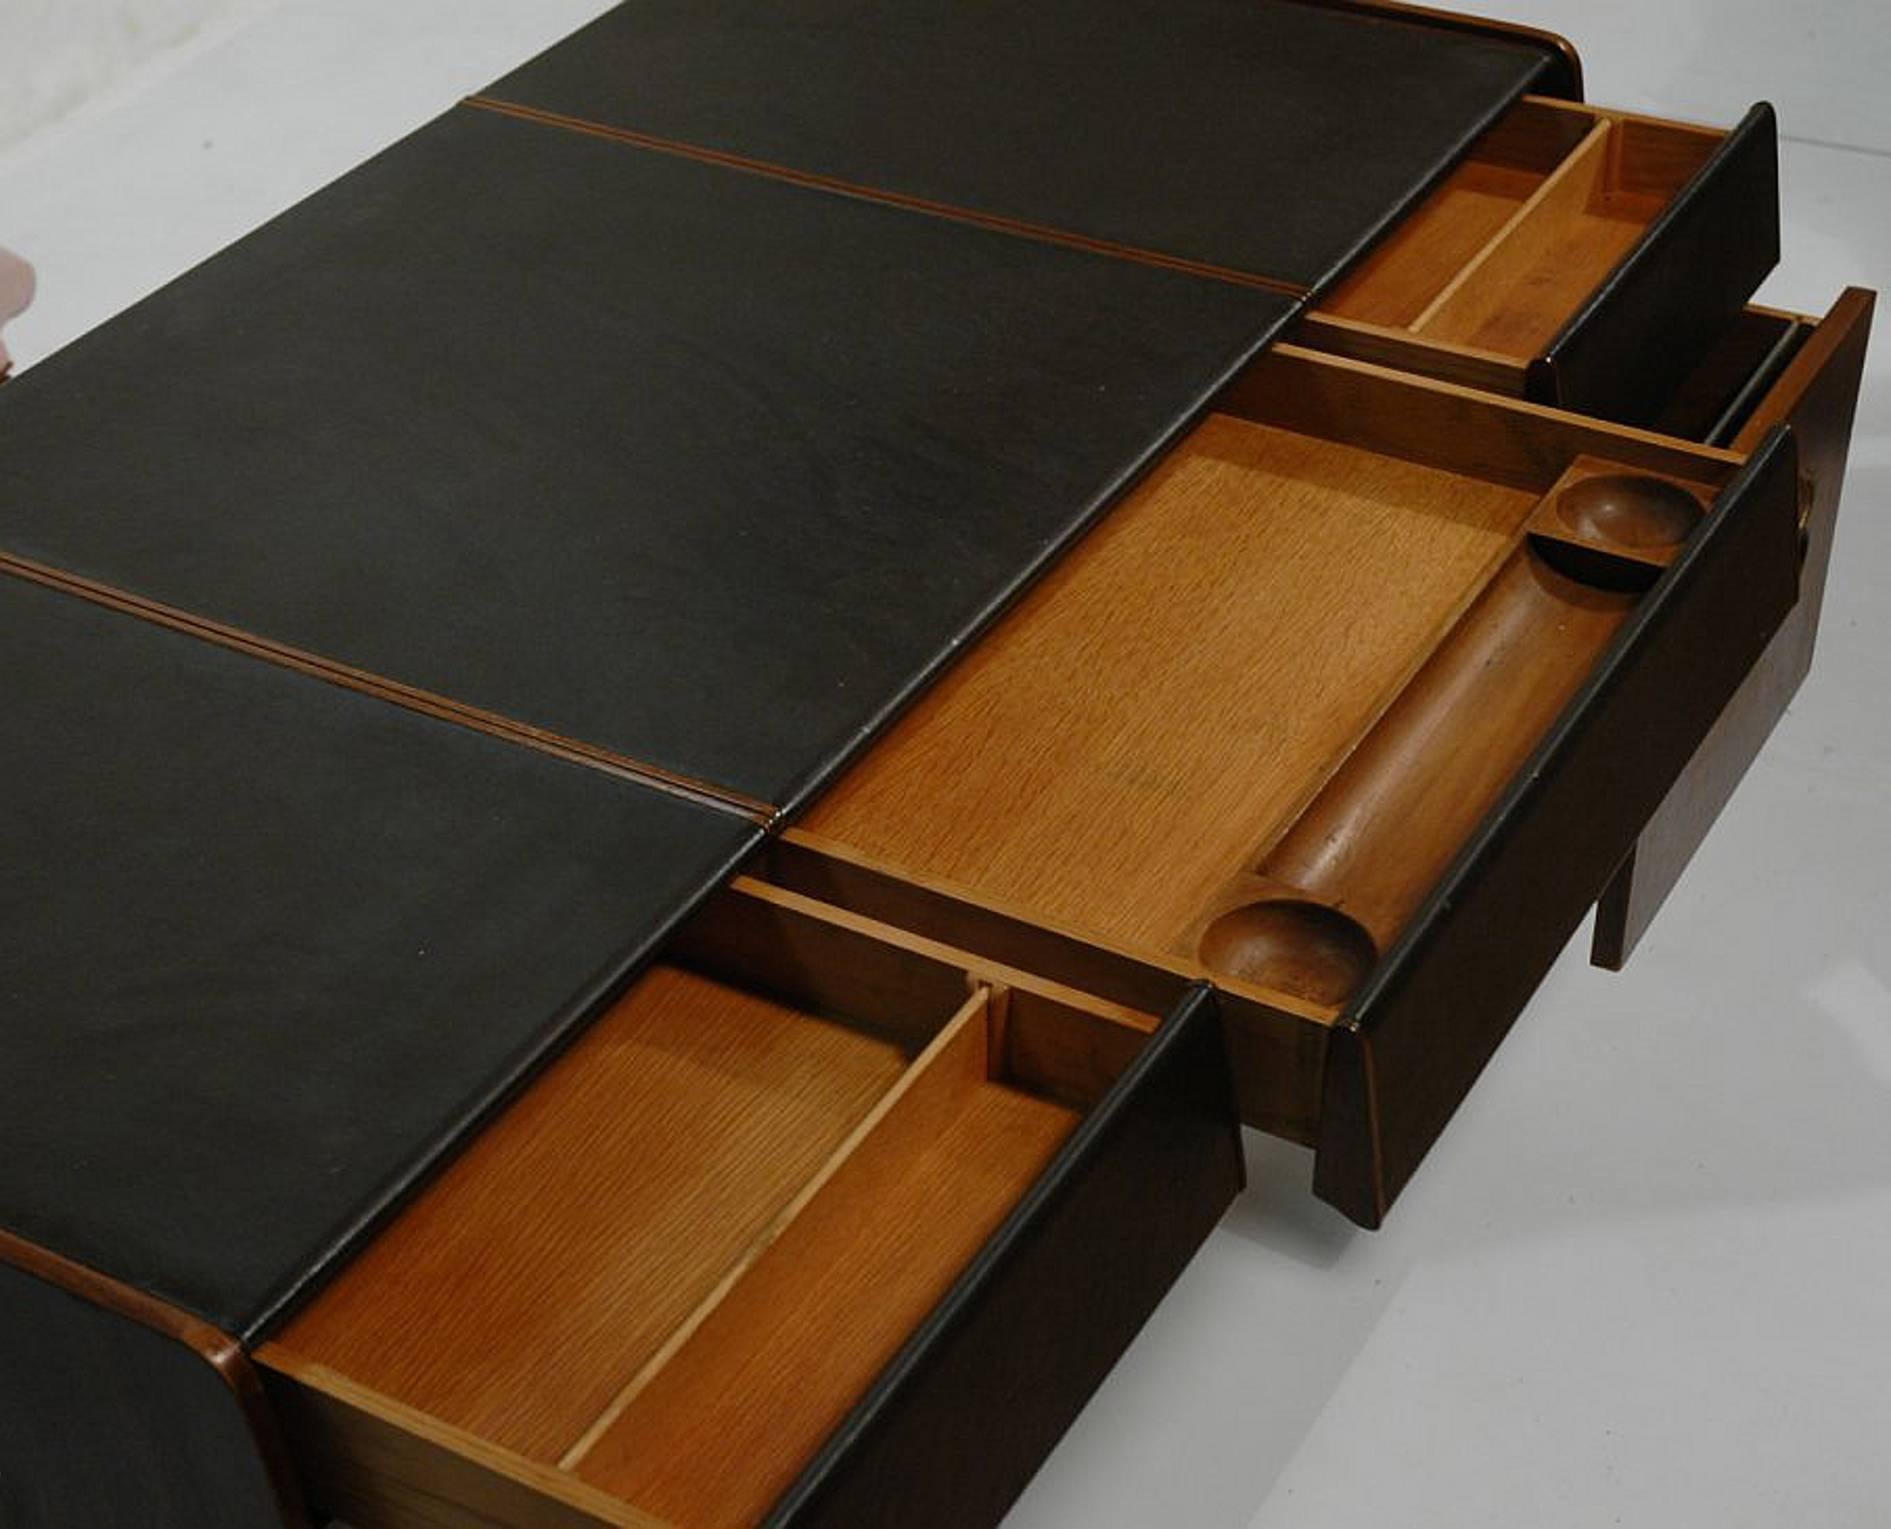 Well designed desk by Bert England for John Widdicomb. The desk has a total of 5 pull out drawers, decorative bronze handles and a finished back should you wish to float the desk. Perfect with modern, traditional or decorative decor